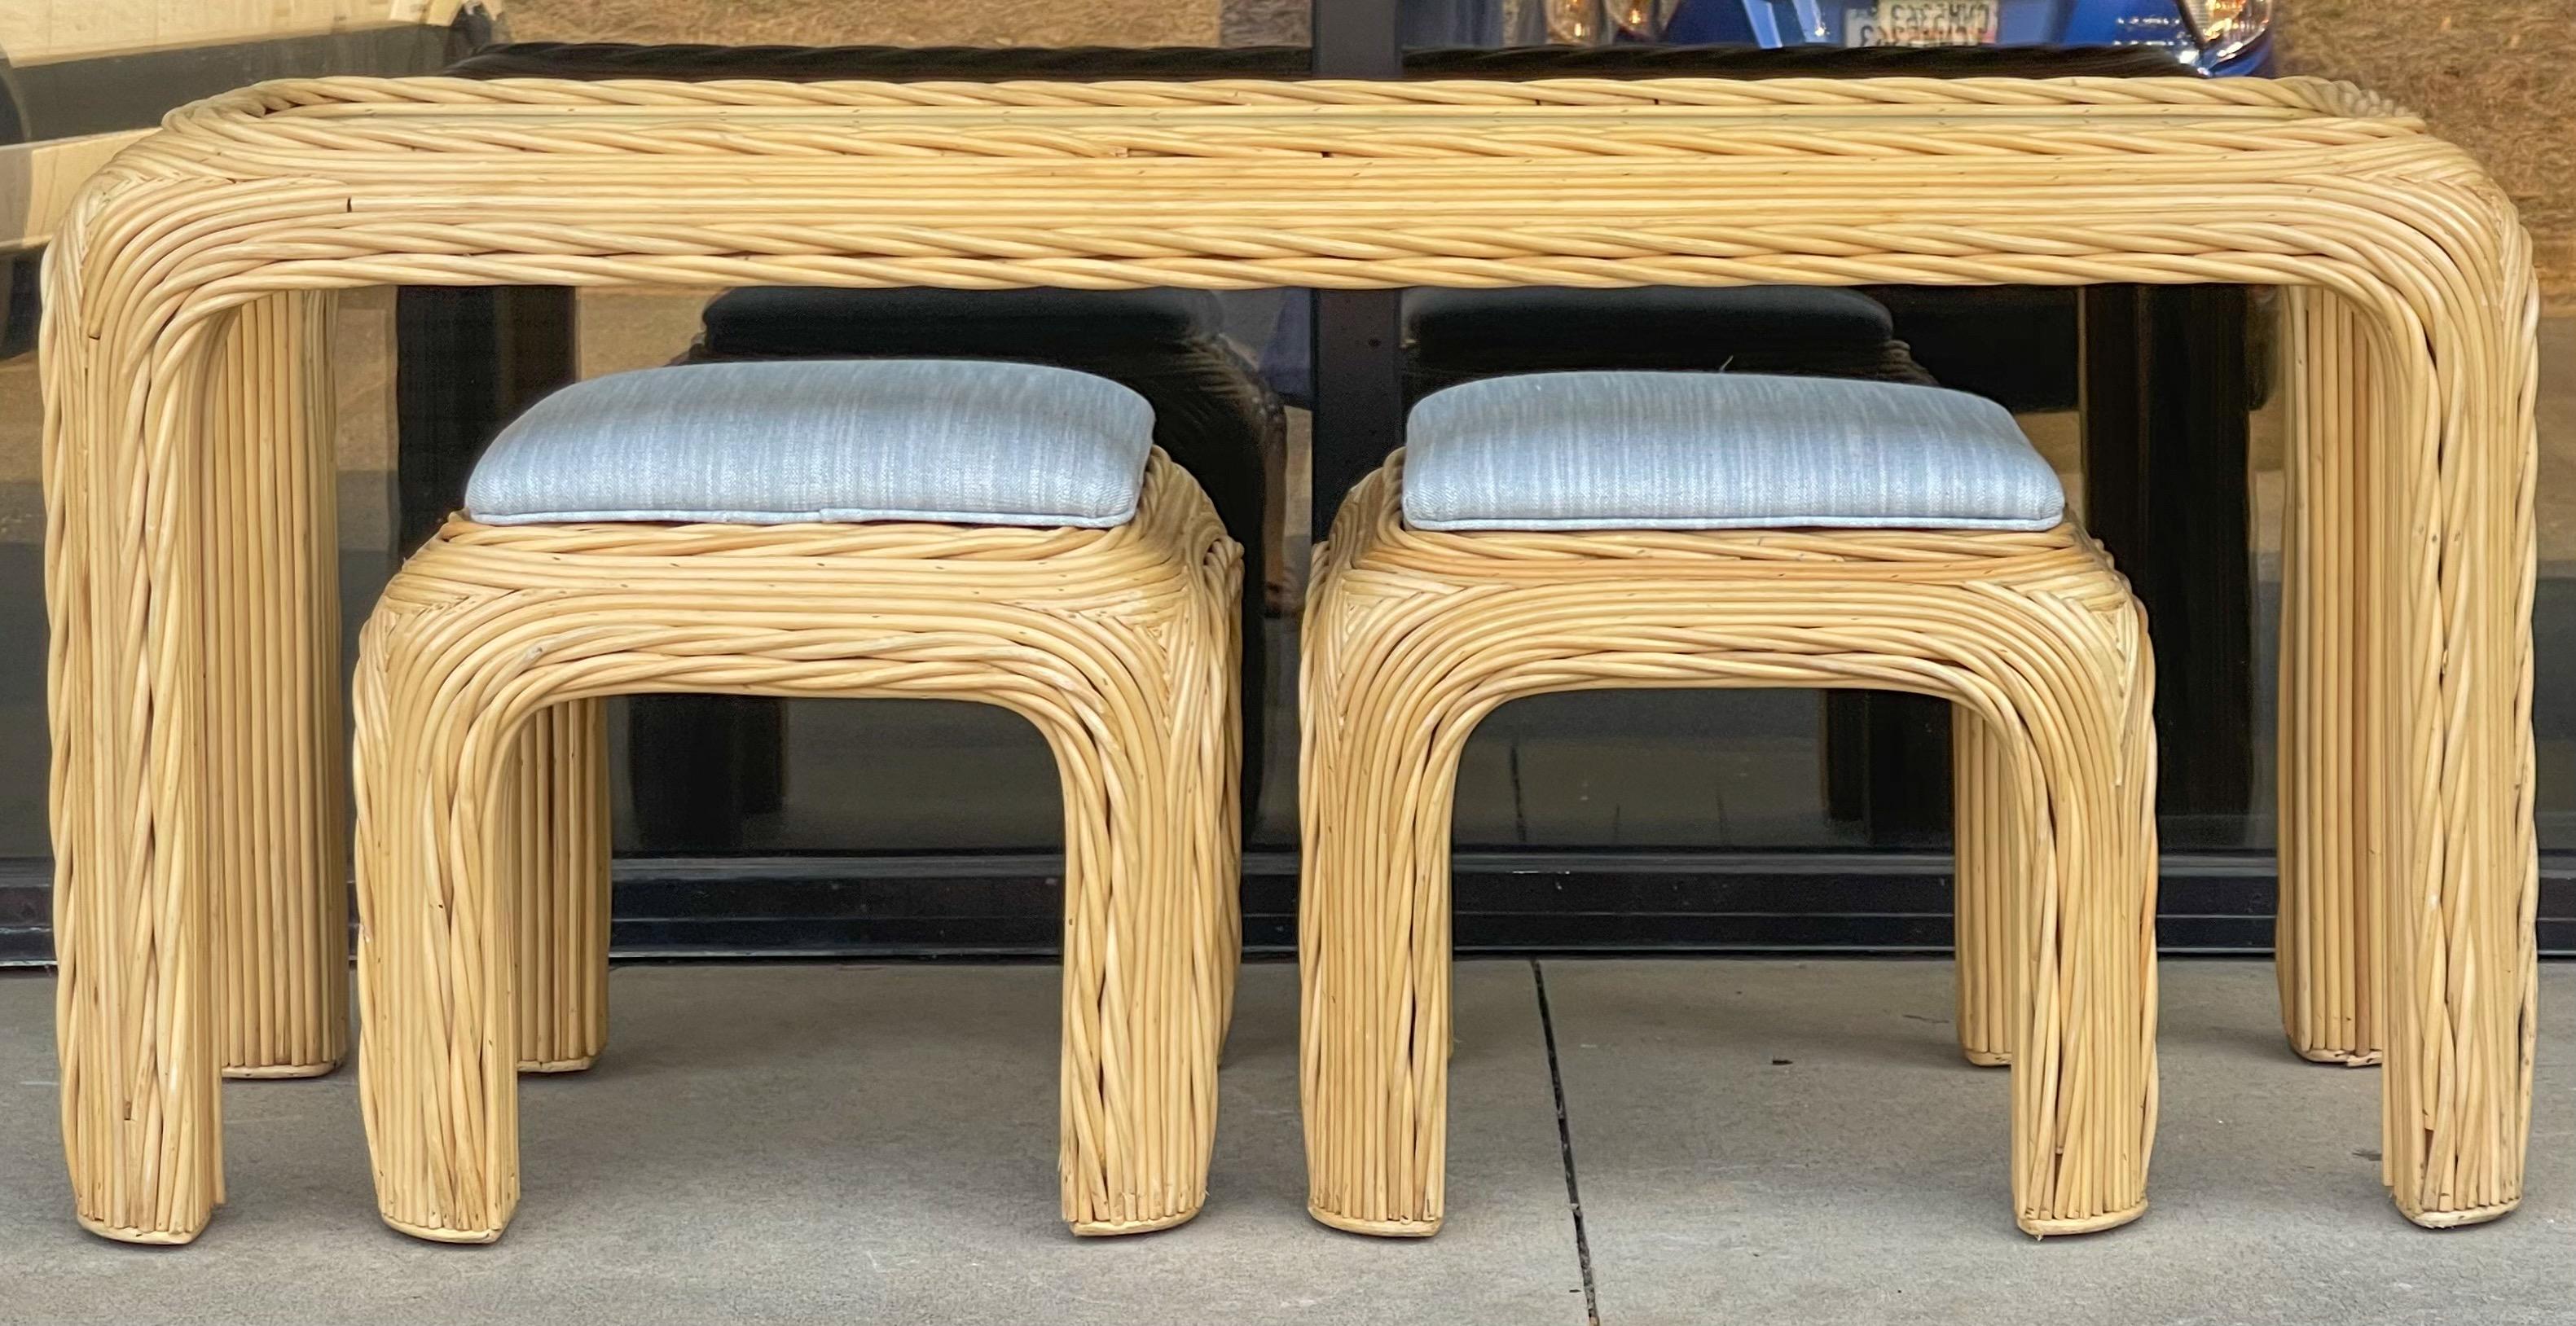 This is a pencil bamboo console table with two matching ottomans. The table has a removable glass top. The ottomans have new upholstery in a linen blend. The set has a fresh modern look! Stools: 18”L x 18”W x 17.5”H.